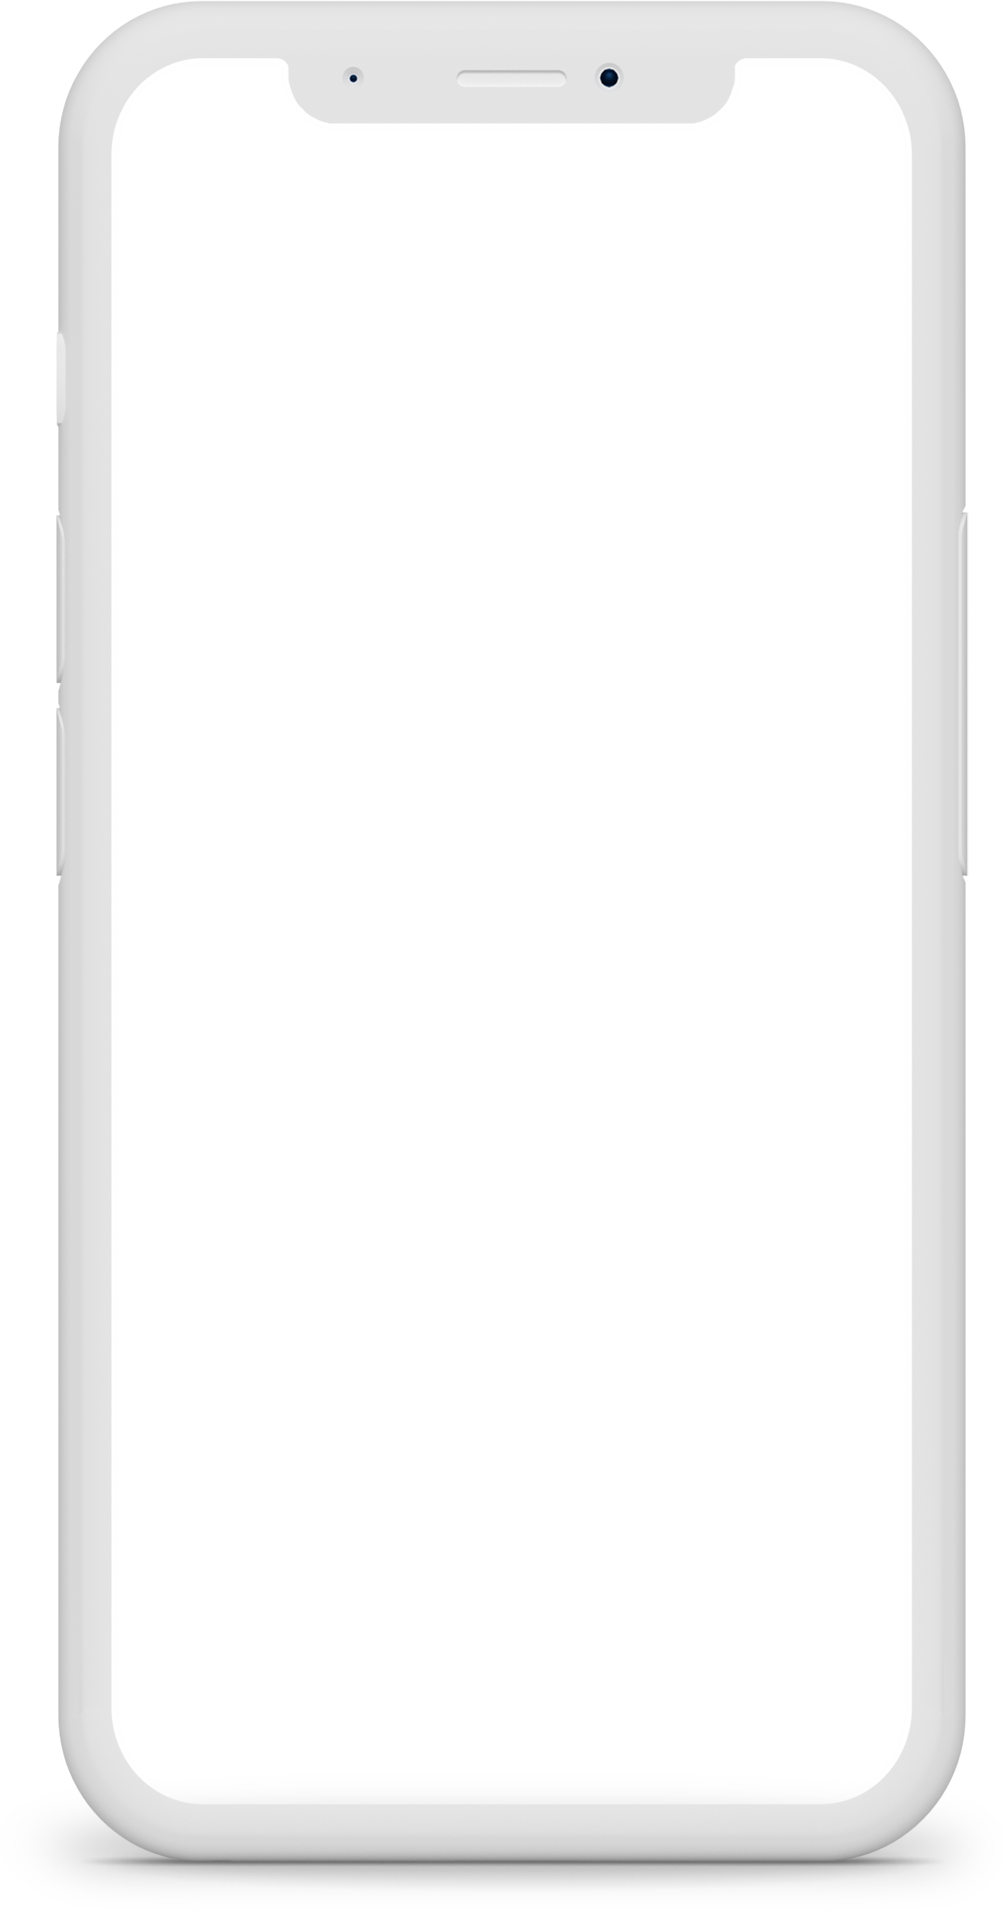 Device image placeholder